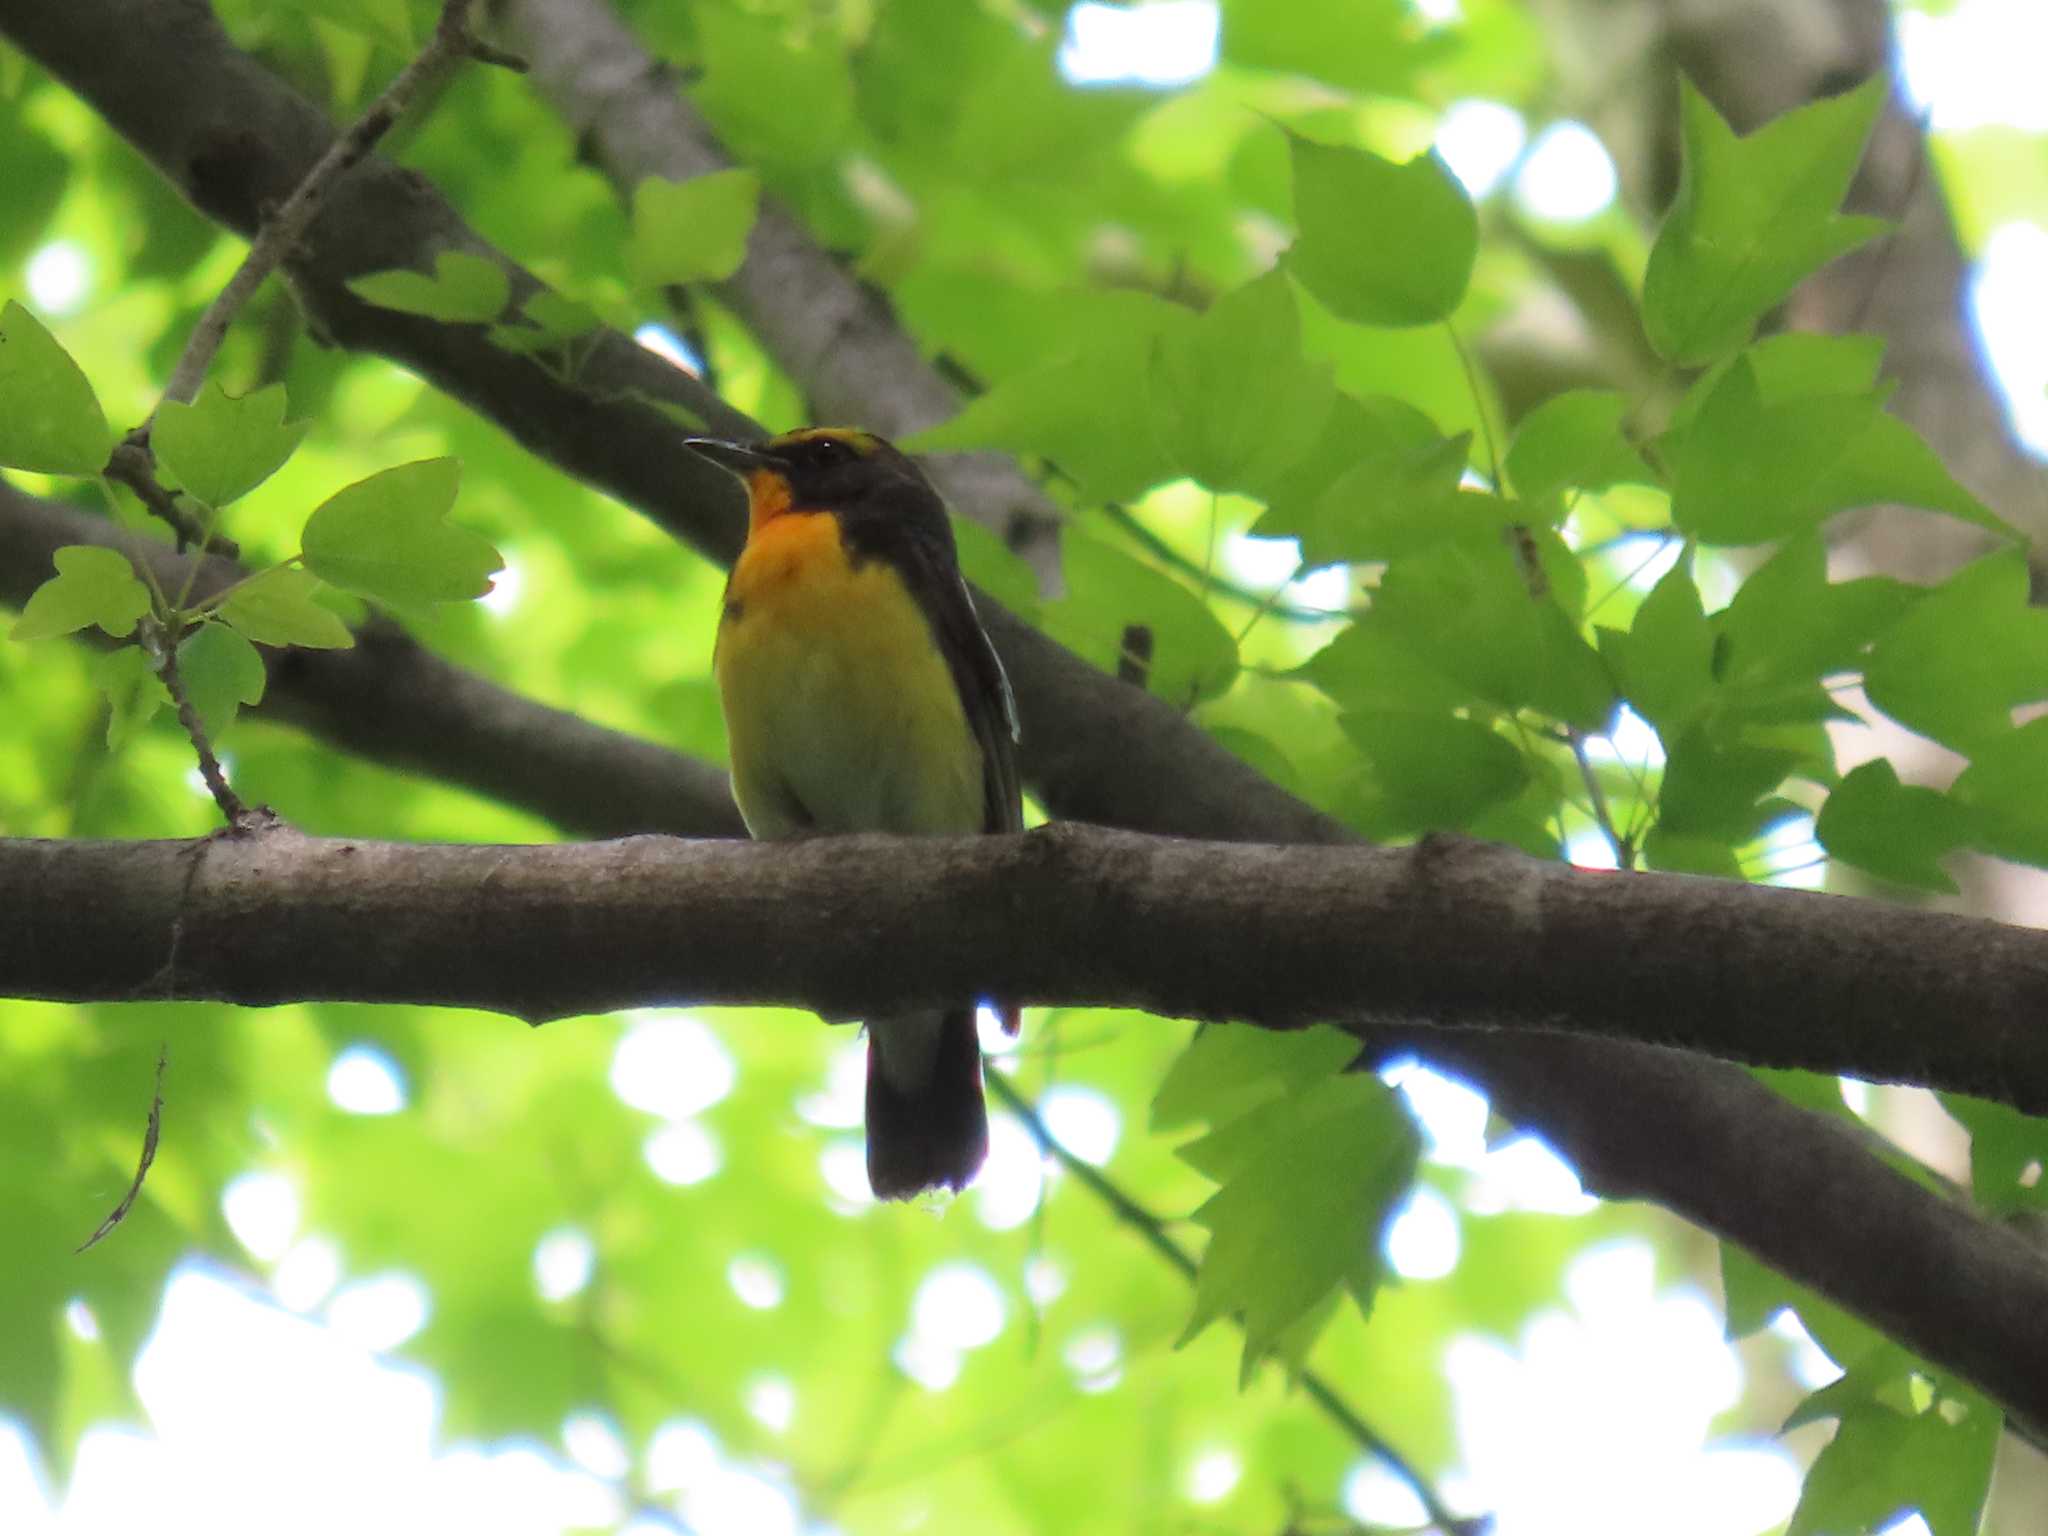 Photo of Narcissus Flycatcher at 武蔵丘陵森林公園 by ぶんちょーず